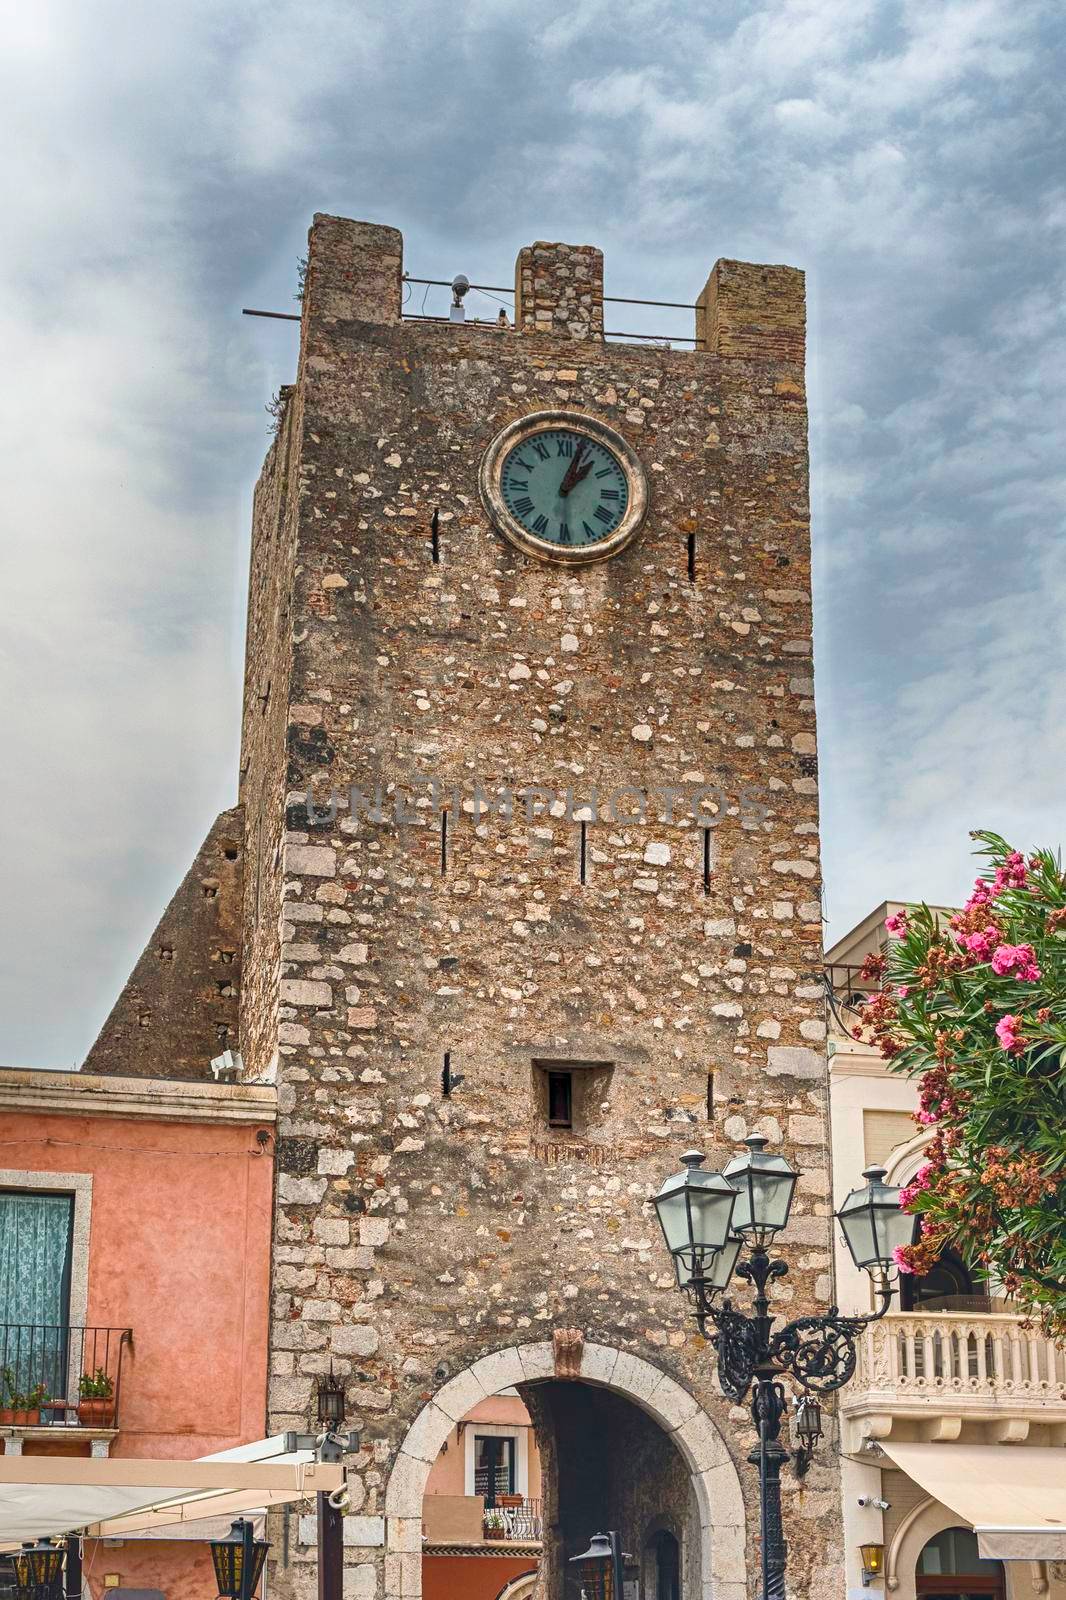 Ancient clocktower, iconic landmark located in the central square of Taormina, Sicily, Italy